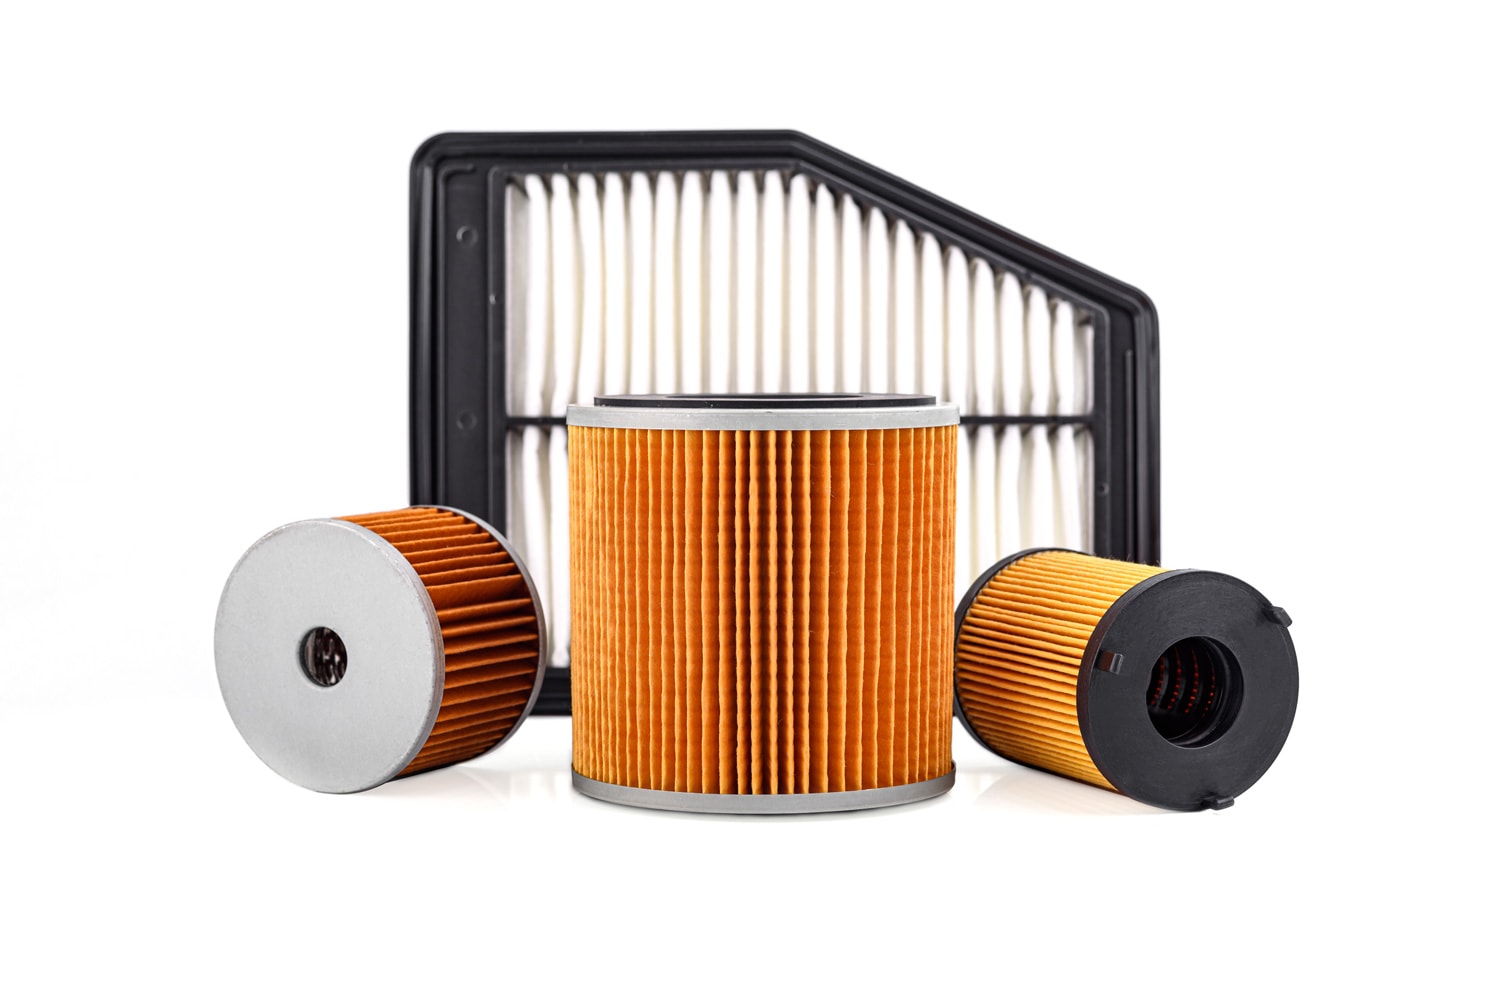  Oil , fuel or air filter for engine car isolated on white background.